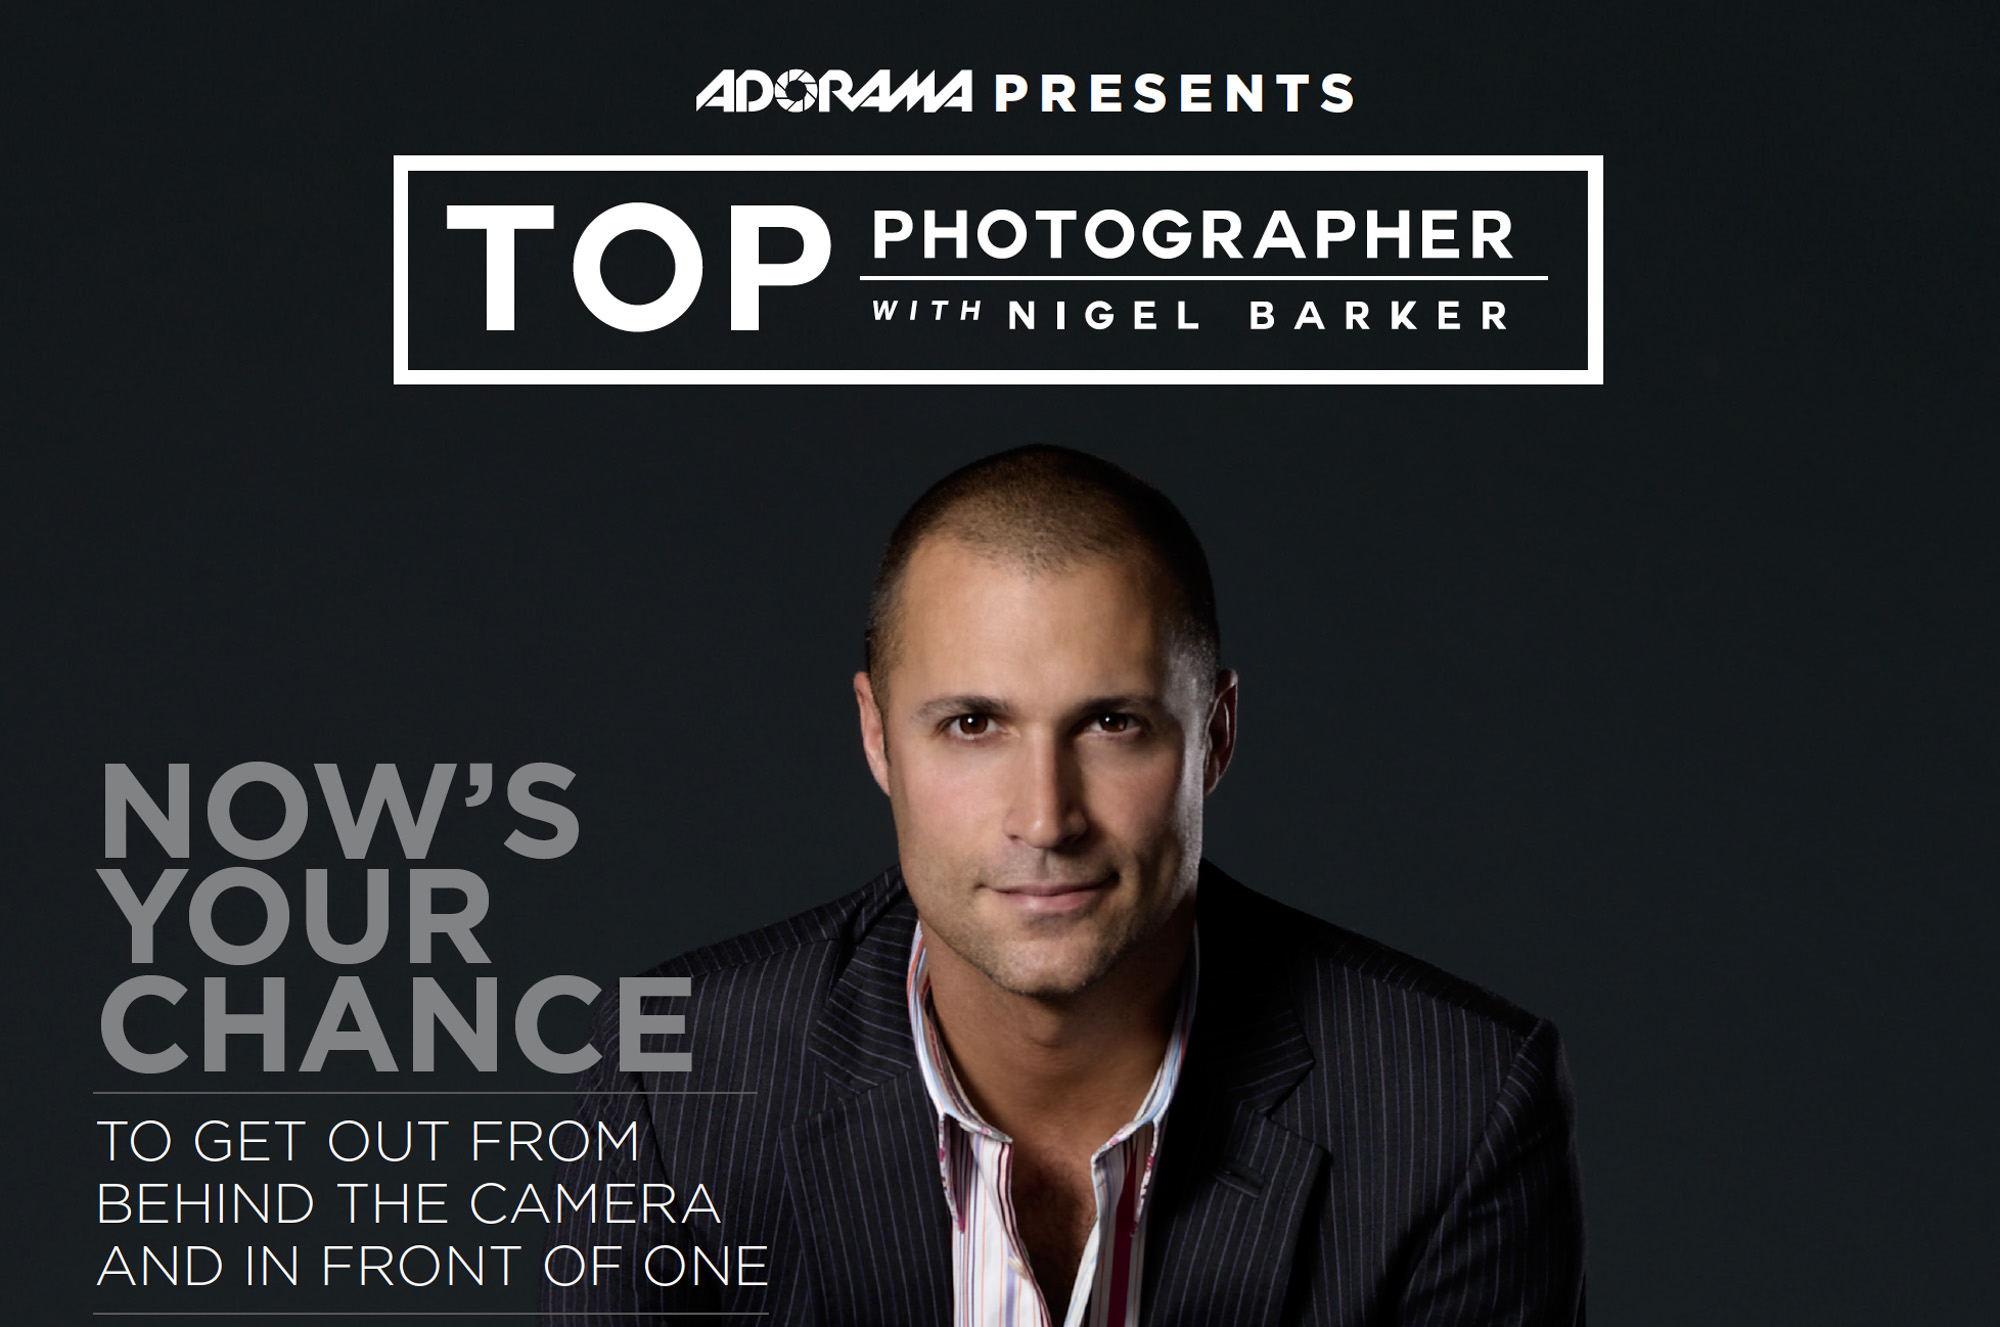 Nigel Barker & Adorama Are Looking For The Next Top Photographer